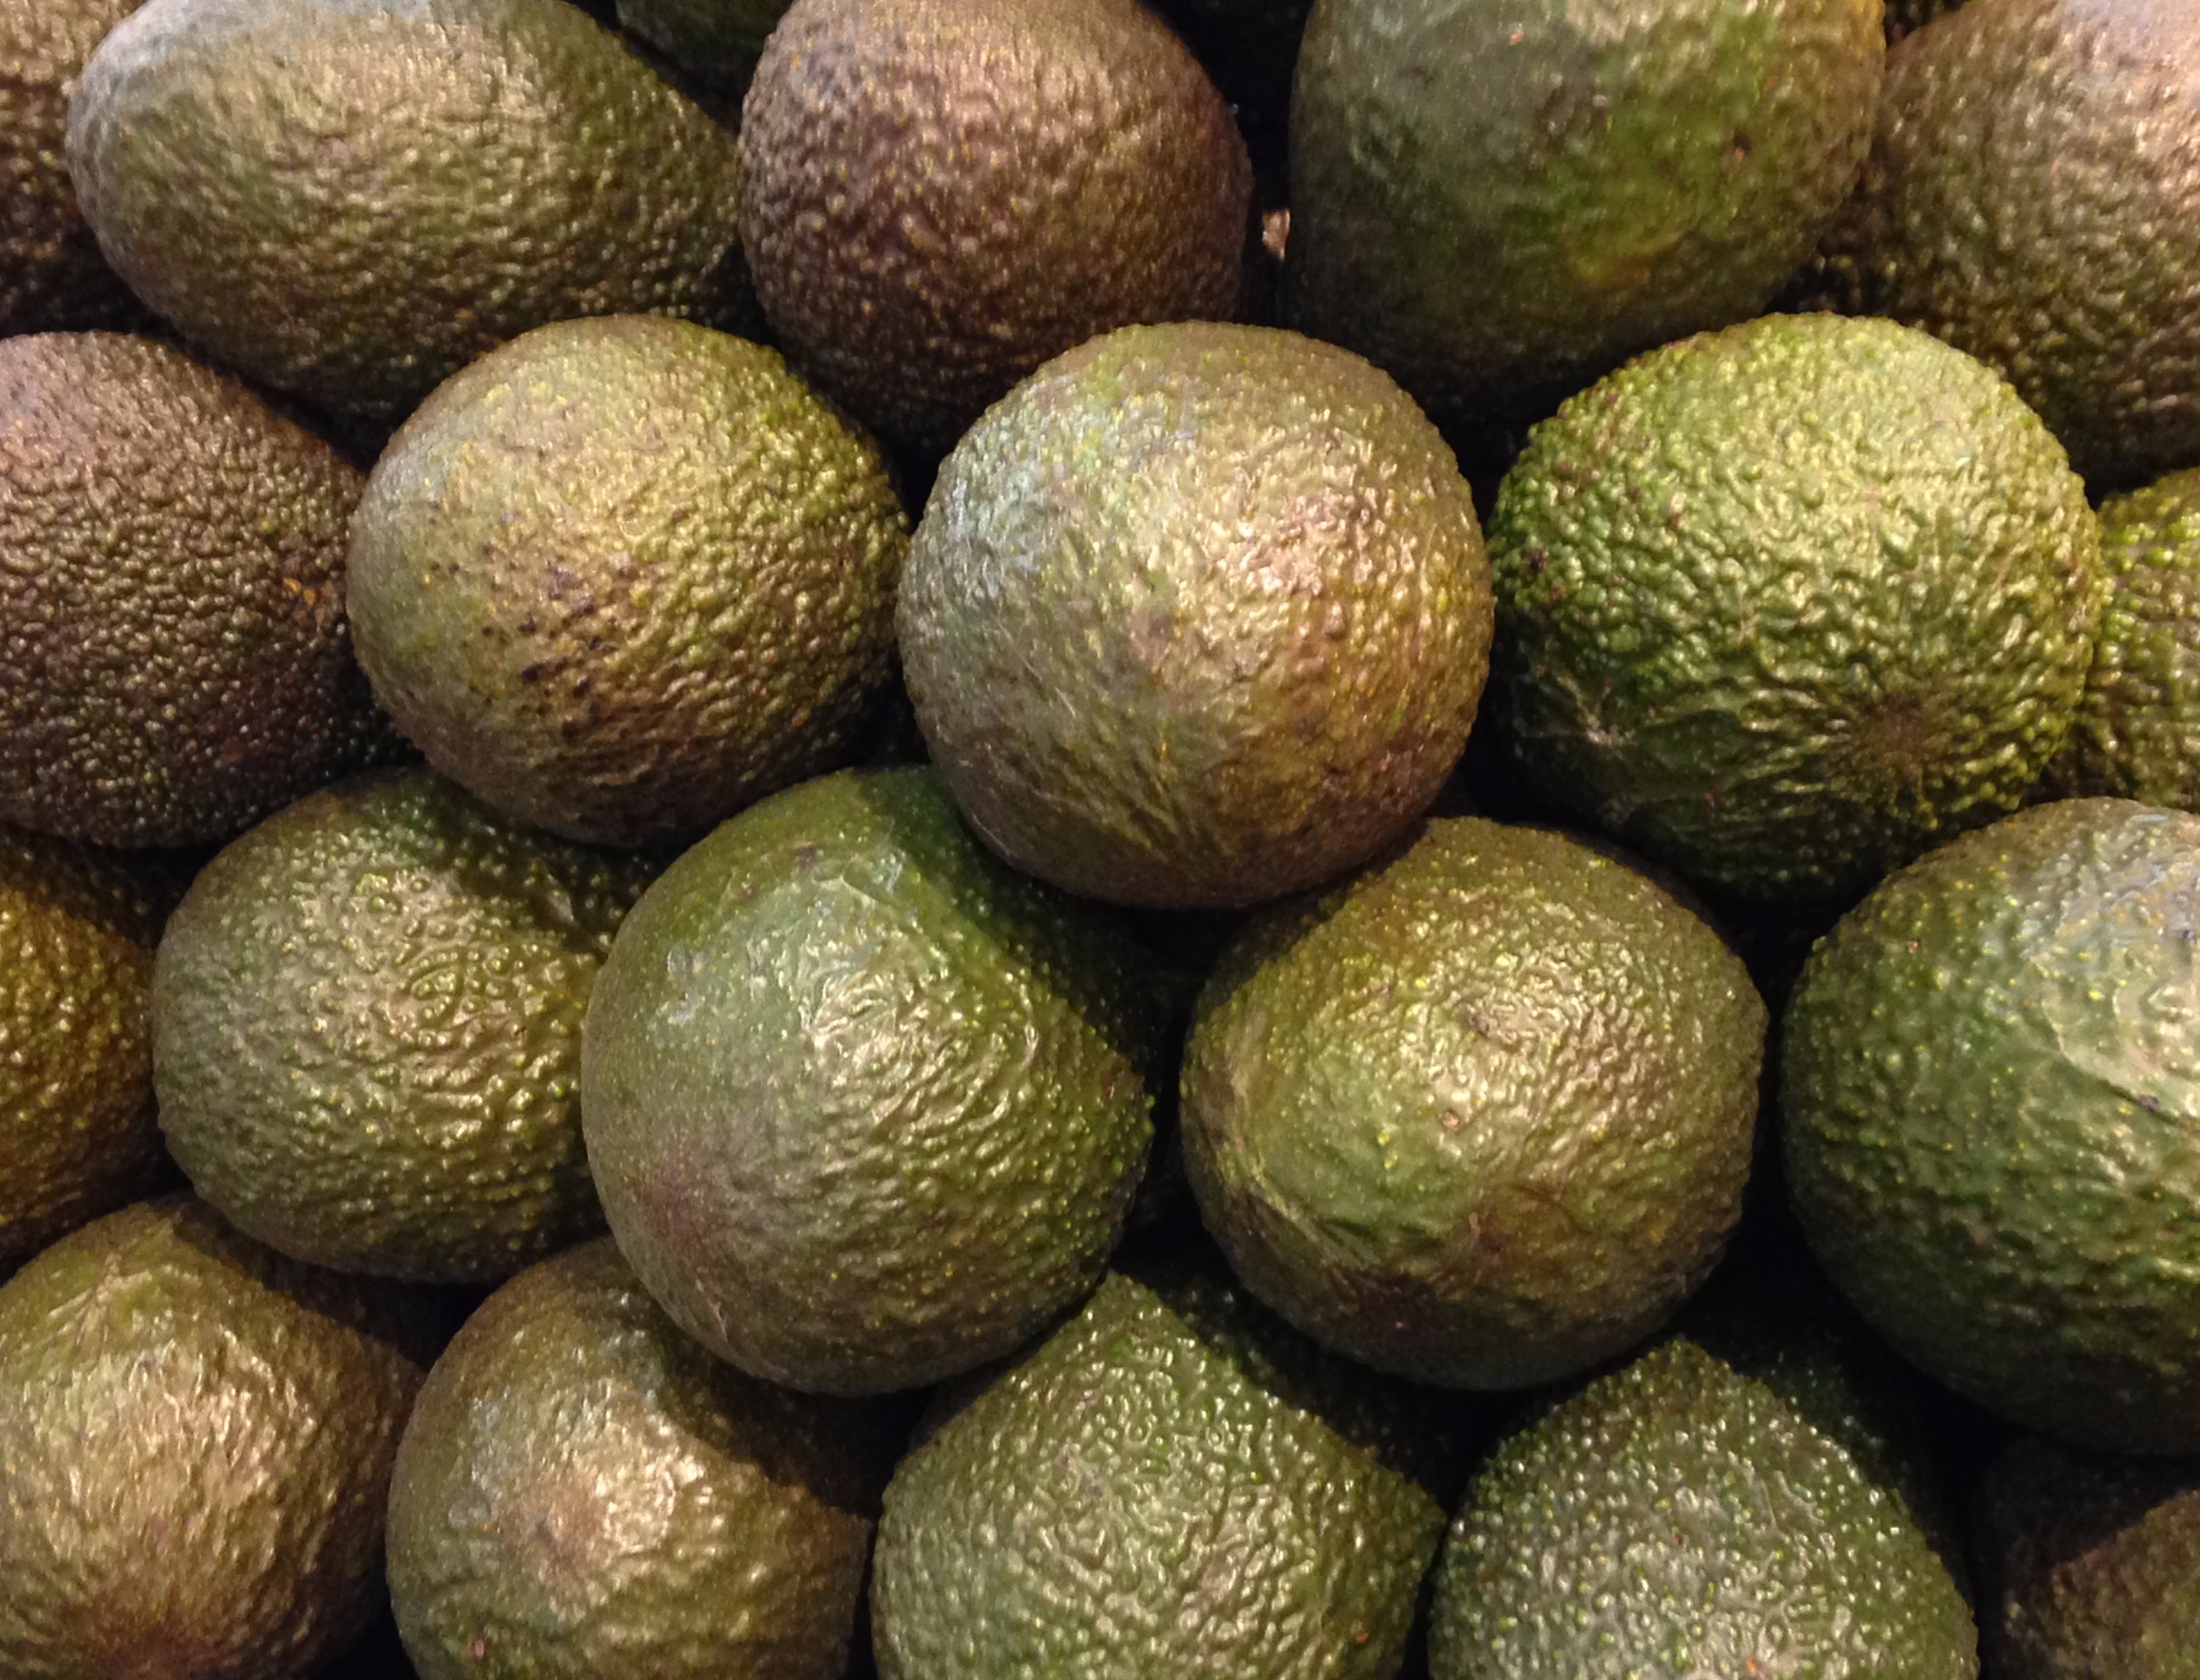 Mexico’s Hass avocado production is forecast to rise to 1.8 million tons and its exports to total over 1.0 million tons in 2016/17.